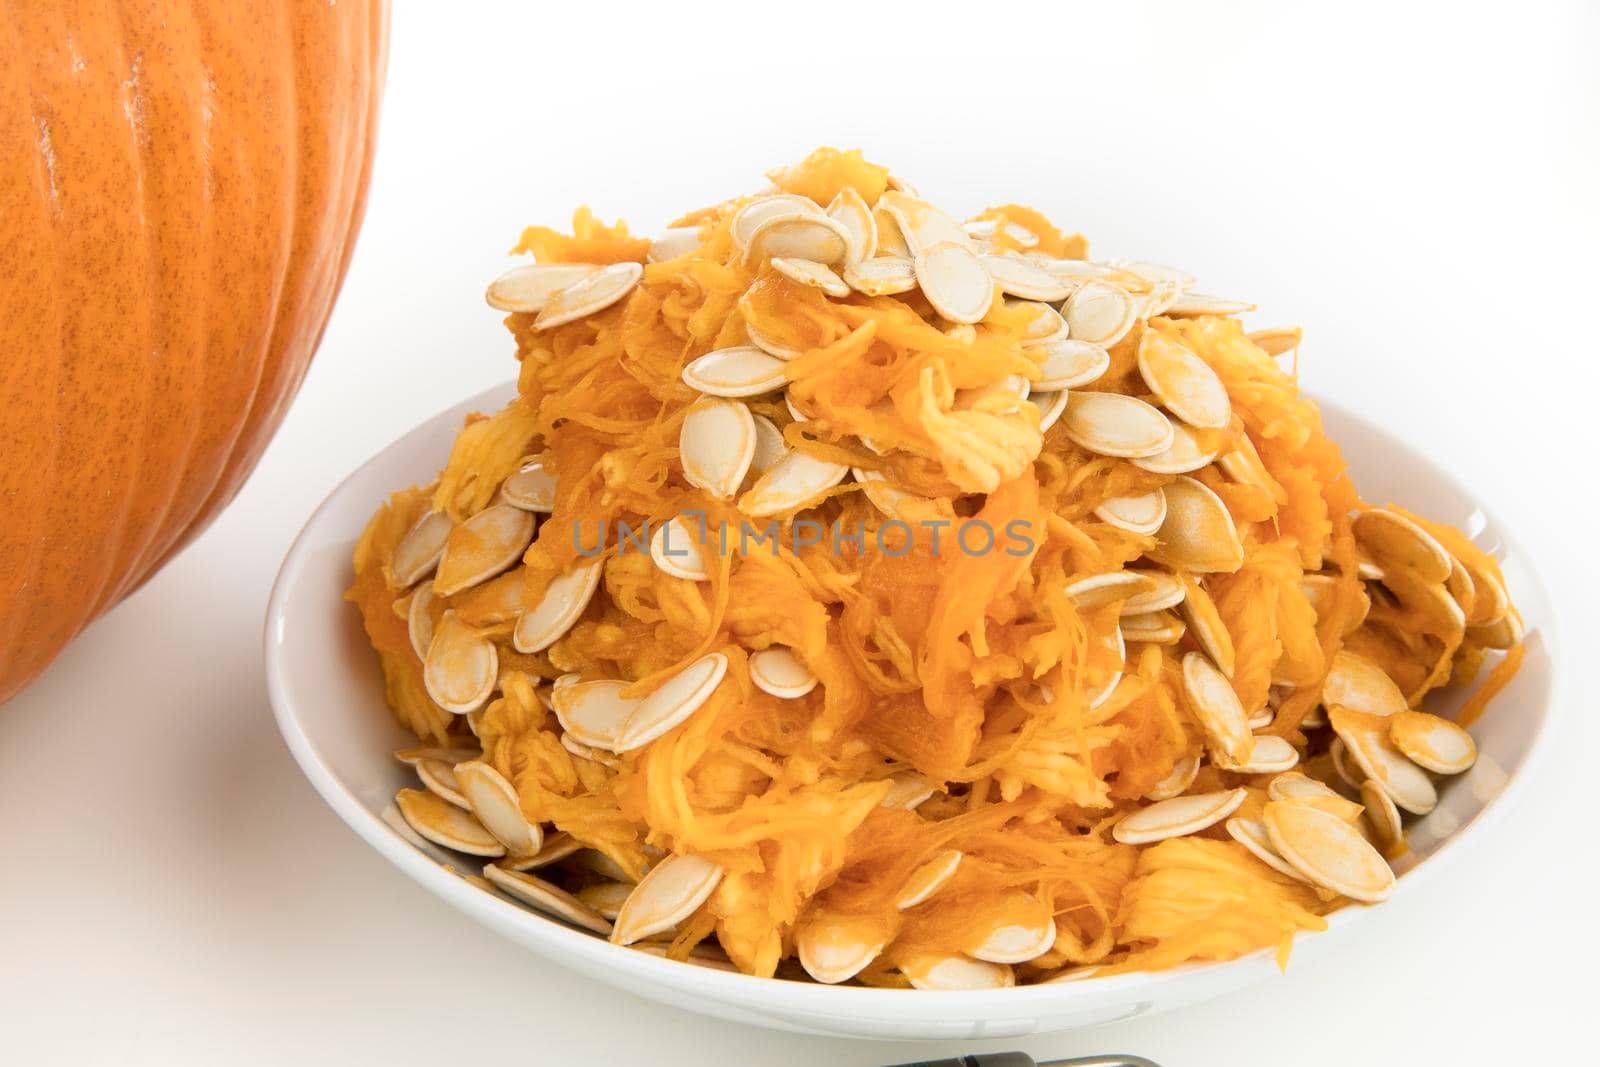 Seeds and pumpkin scrapings from preparing pumpking for carving